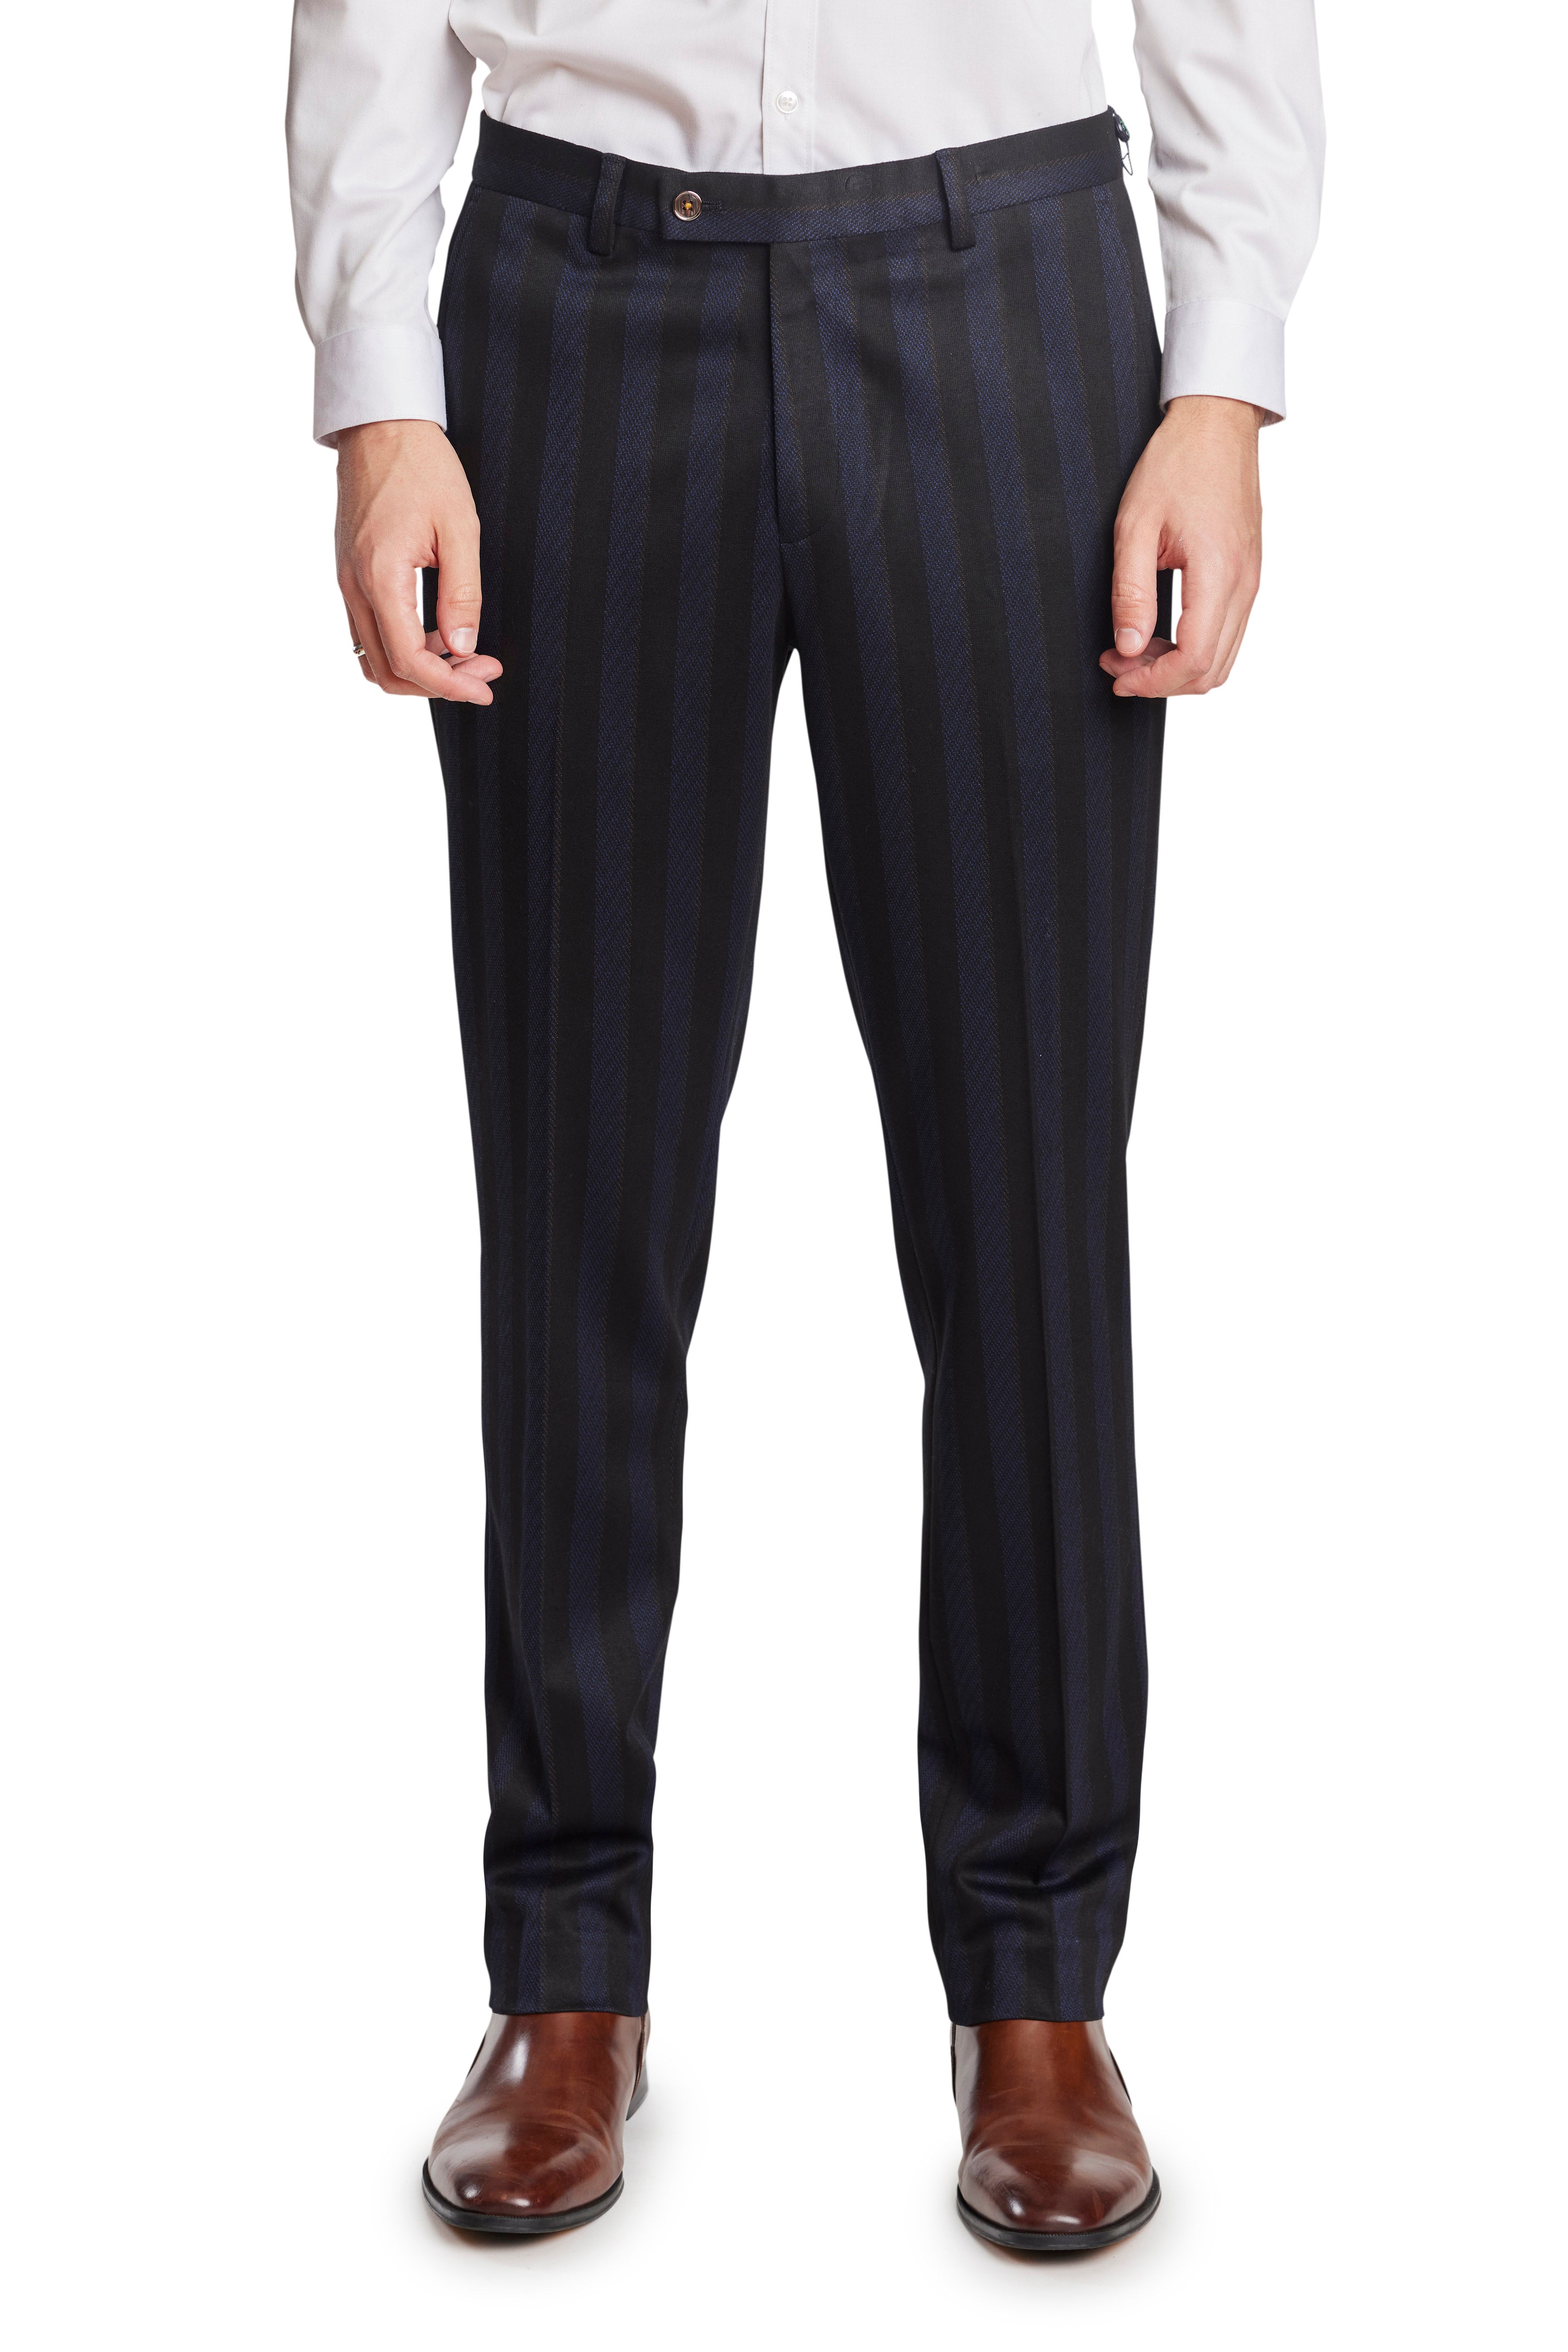 Amazon.com: Men's Dress Striped Pants Slim Fit Flat Front Business Trousers  Straight-Fit Formal Pants Trousers (28,Black) : Clothing, Shoes & Jewelry